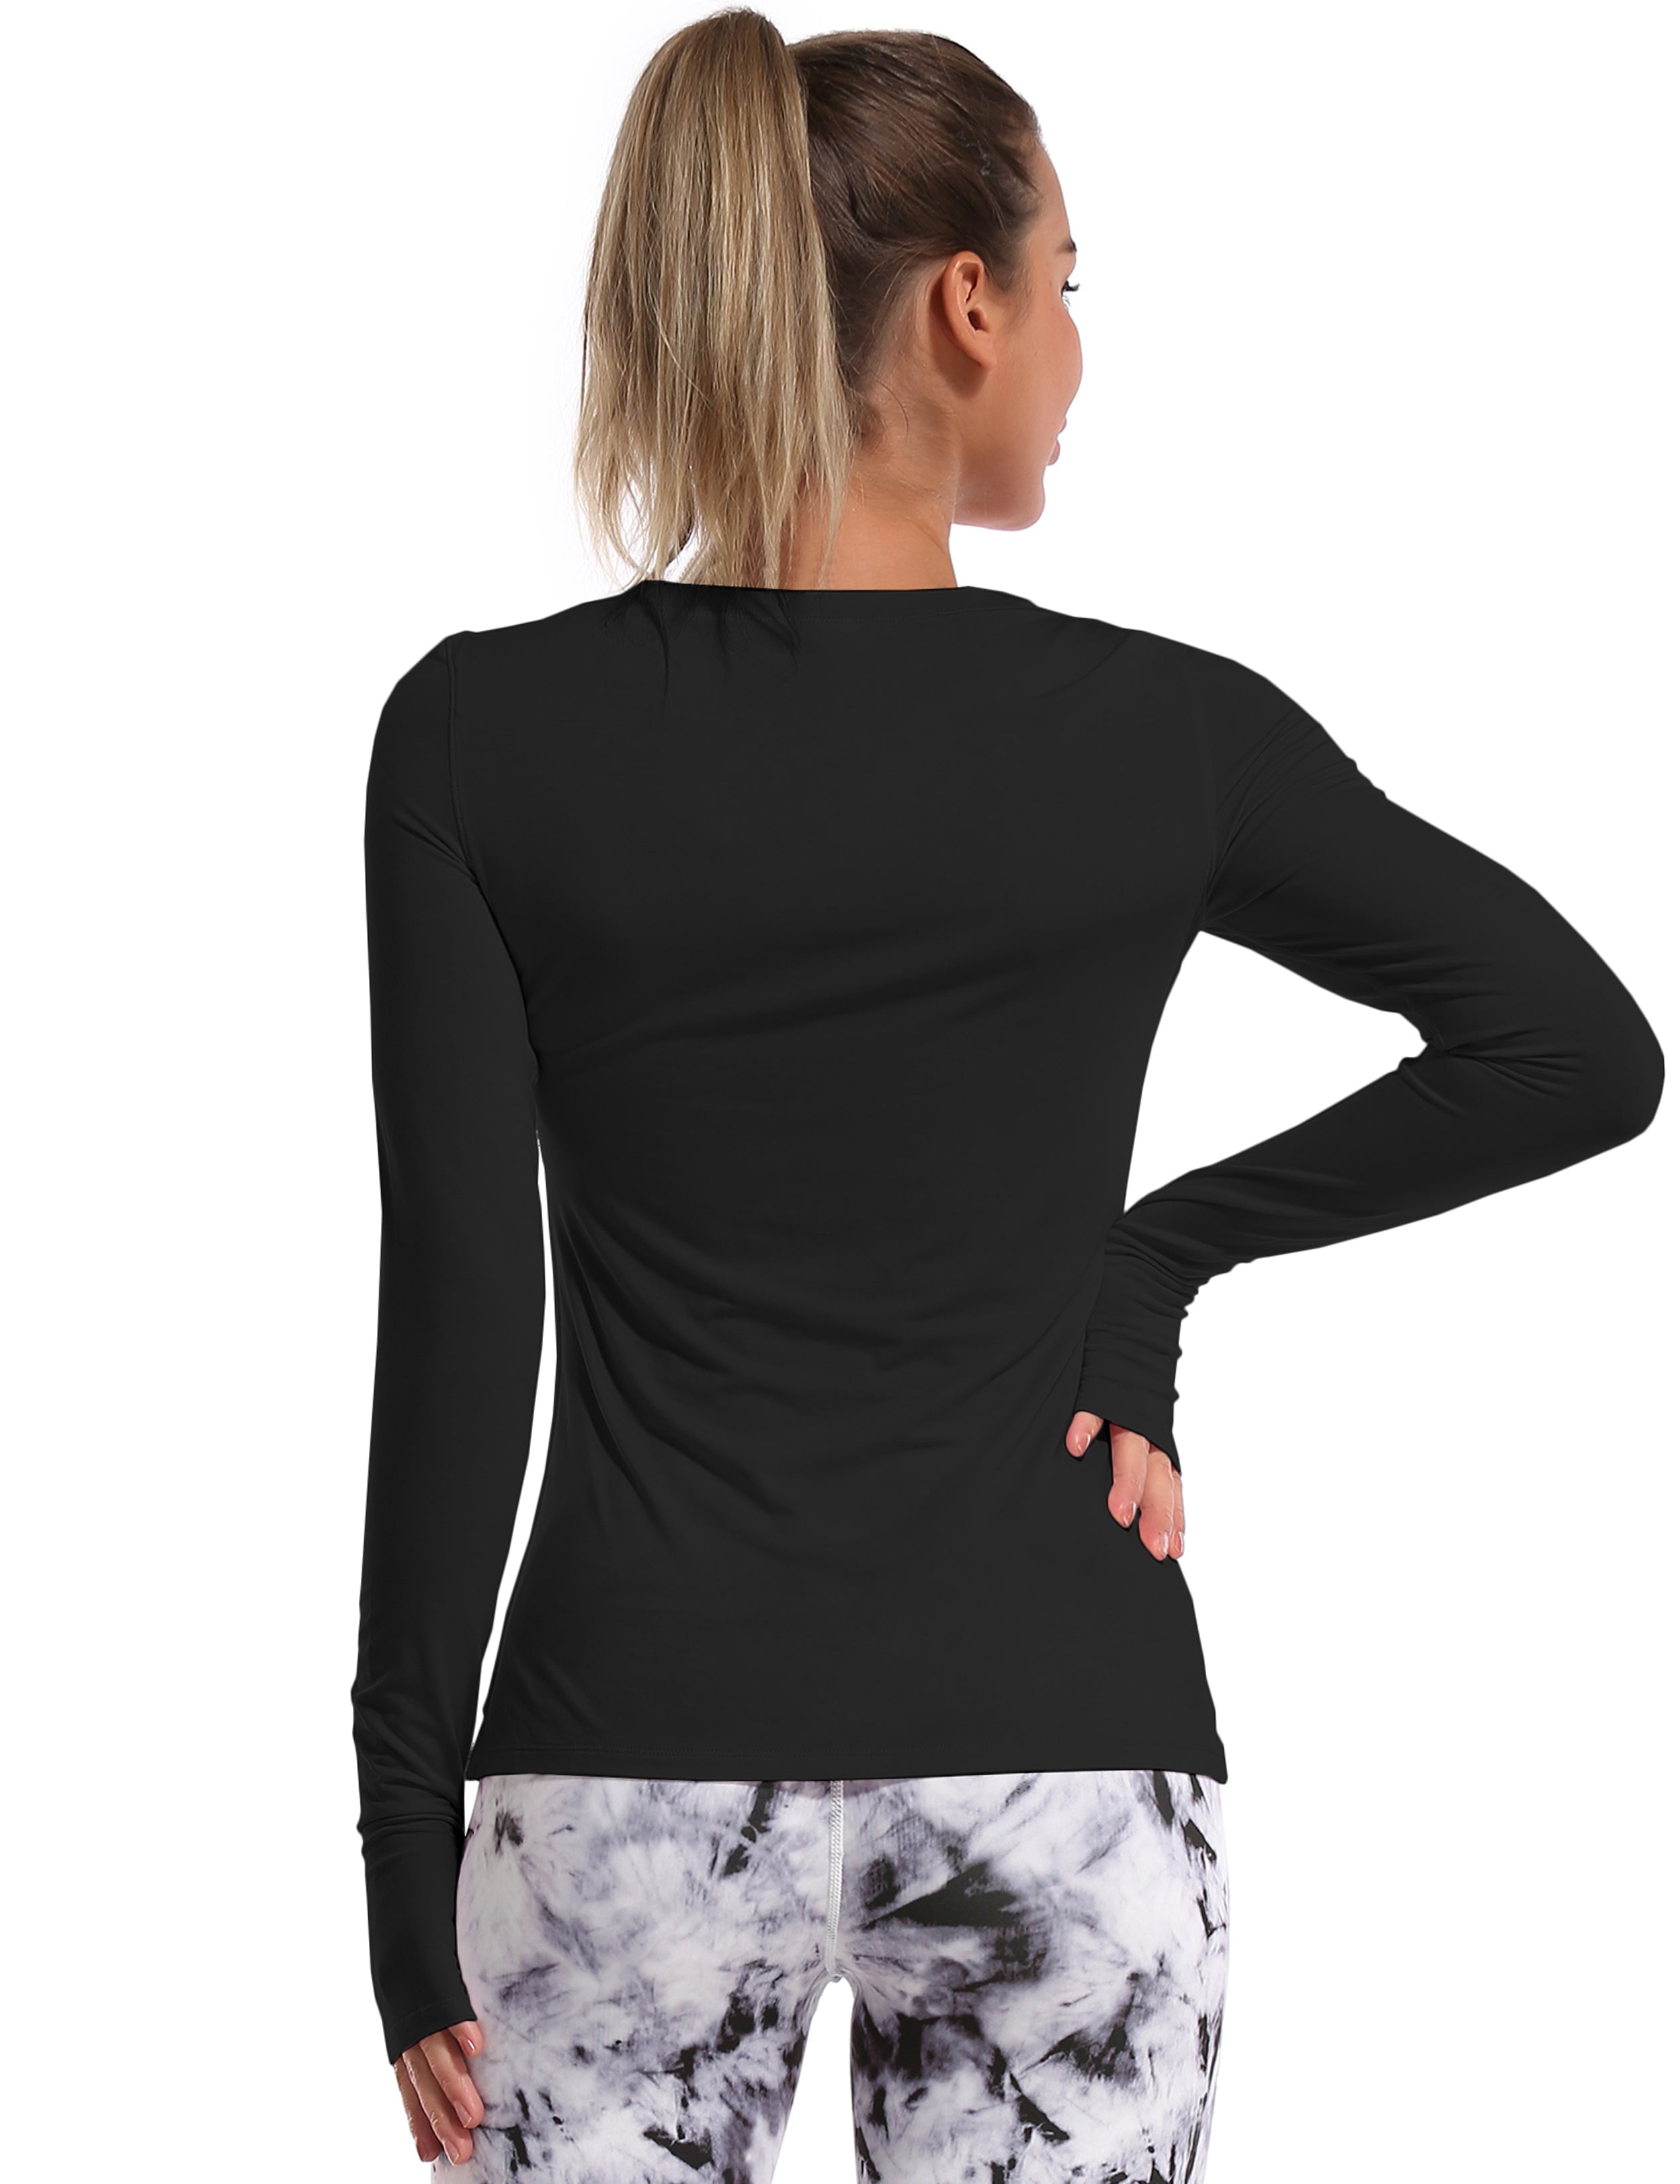 Athlete Long Sleeve Tops black Designed for On the Move Slim fit 93%Modal/7%Spandex Four-way stretch Naturally breathable Super-Soft, Modal Fabric